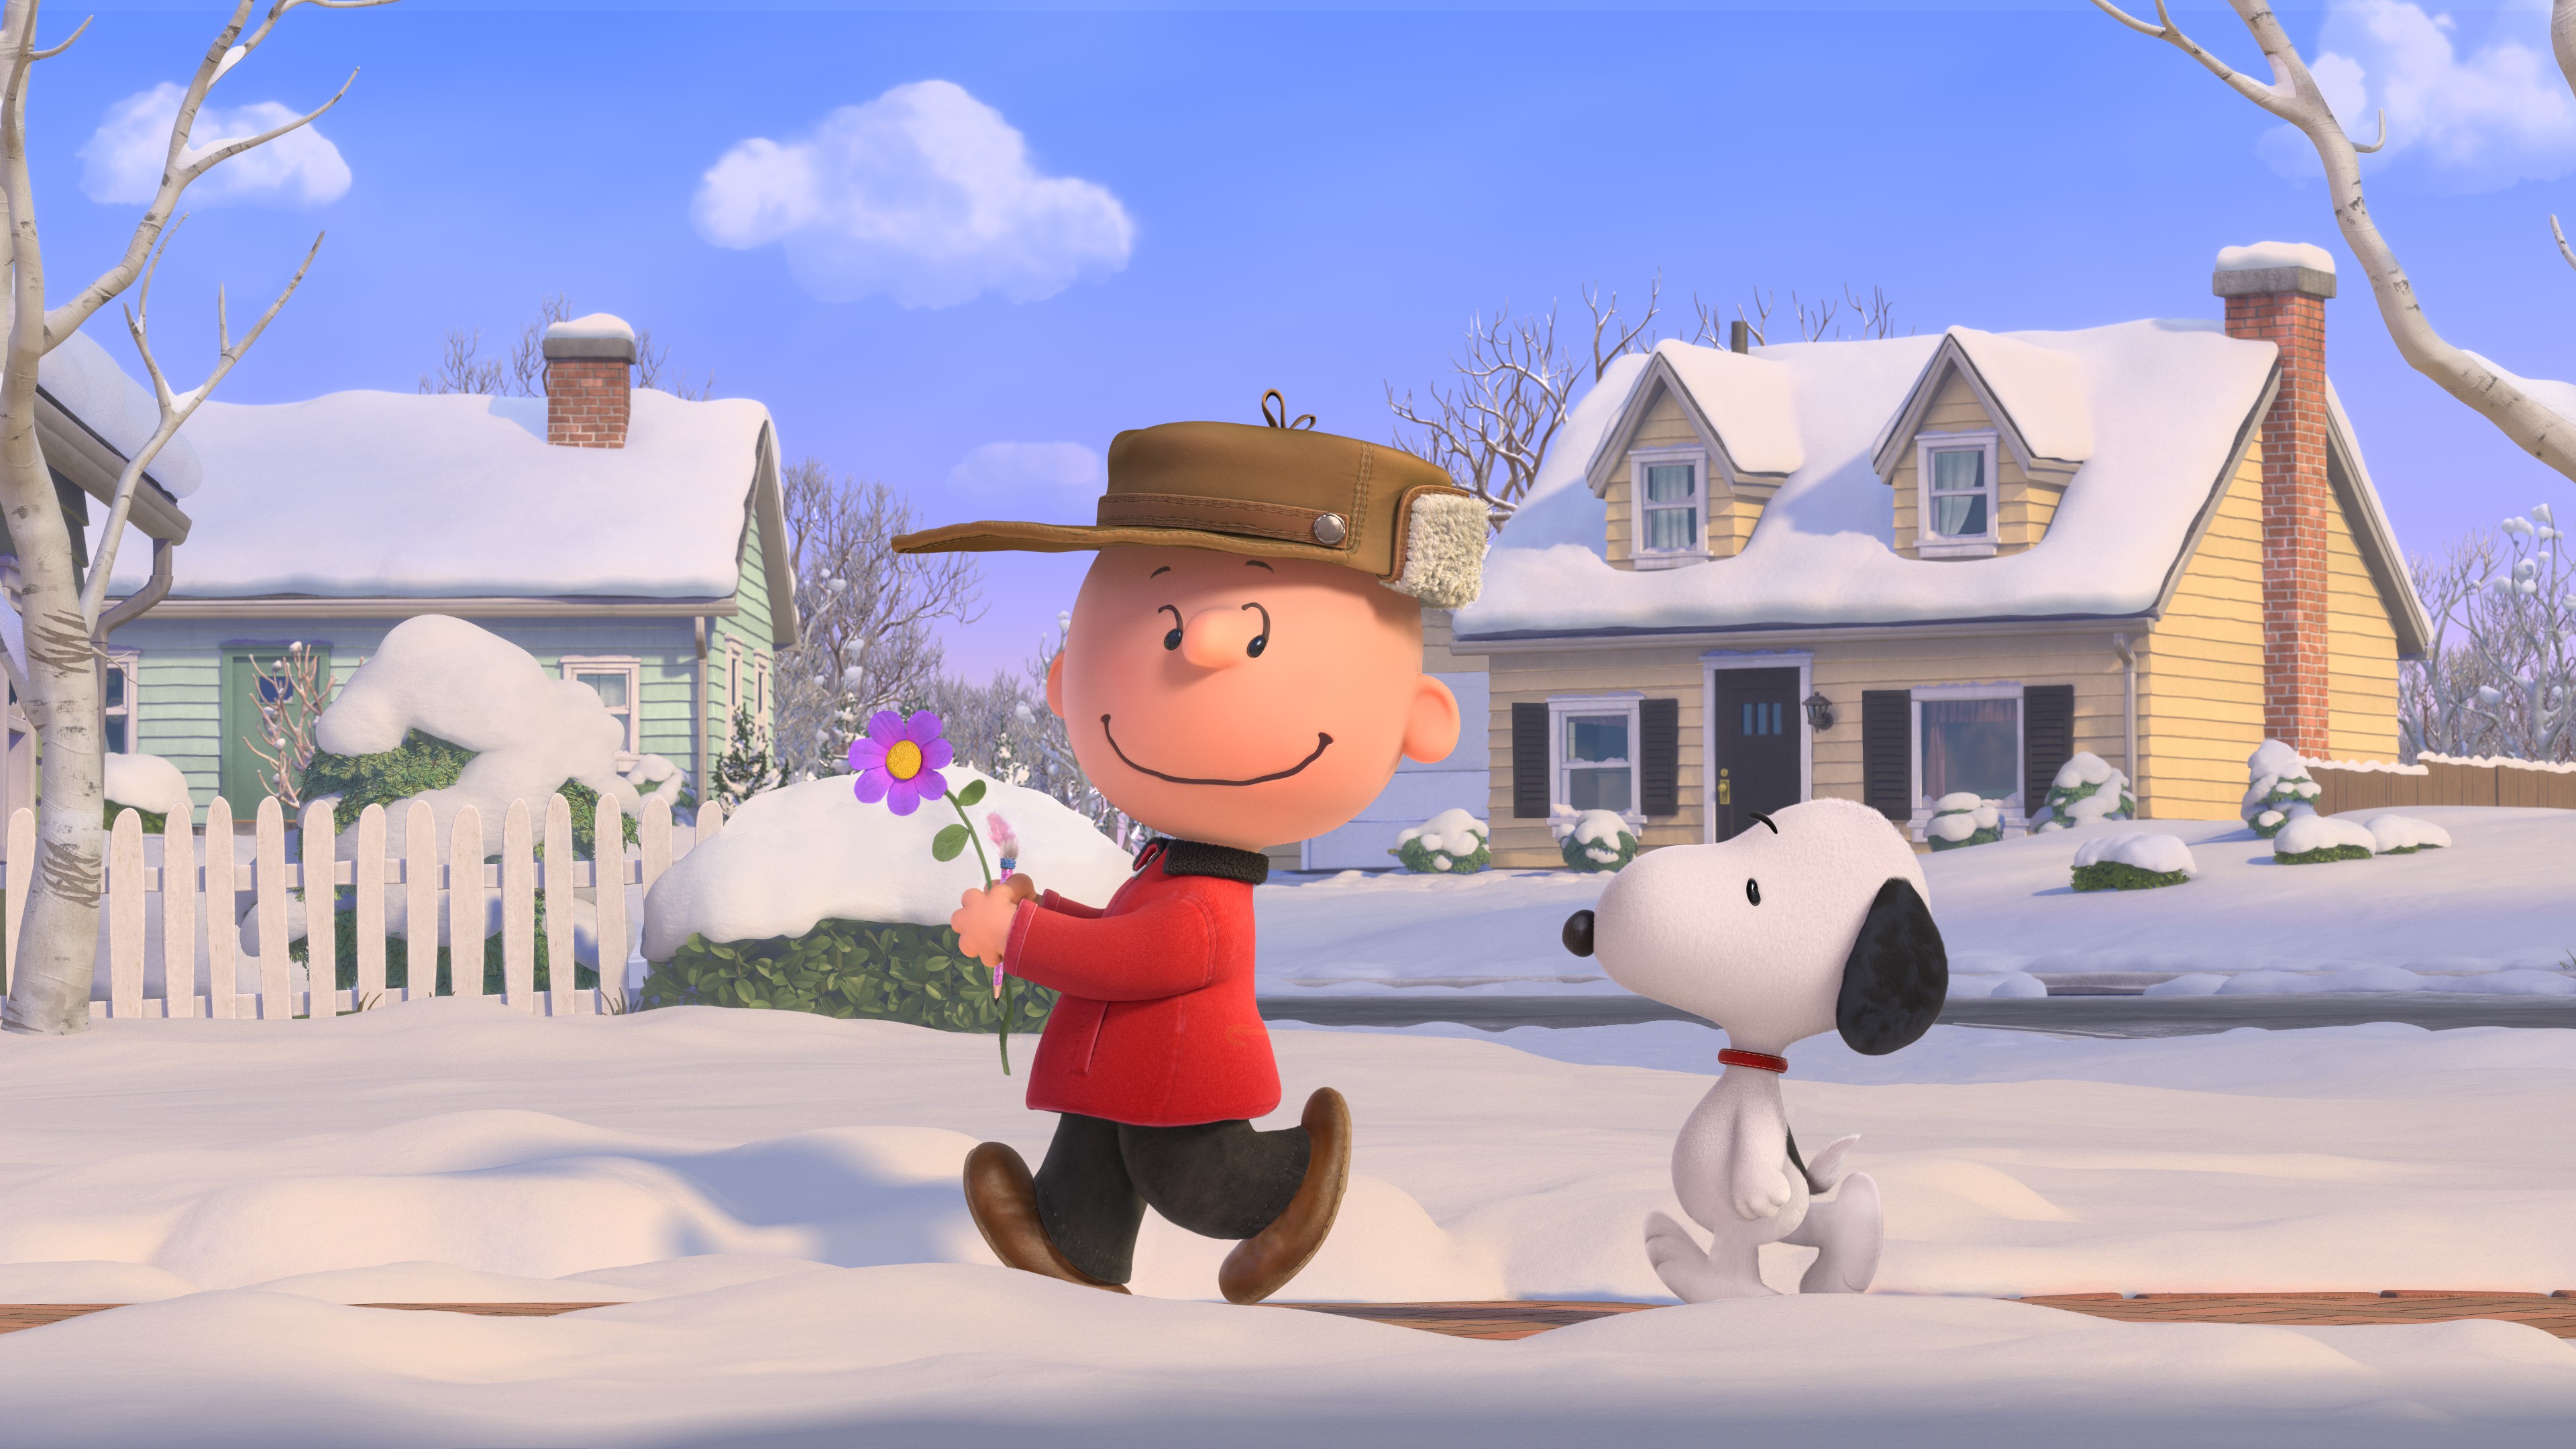 Wallpaper The Peanuts Movie Snoopy Charlie Brown Winter Movies